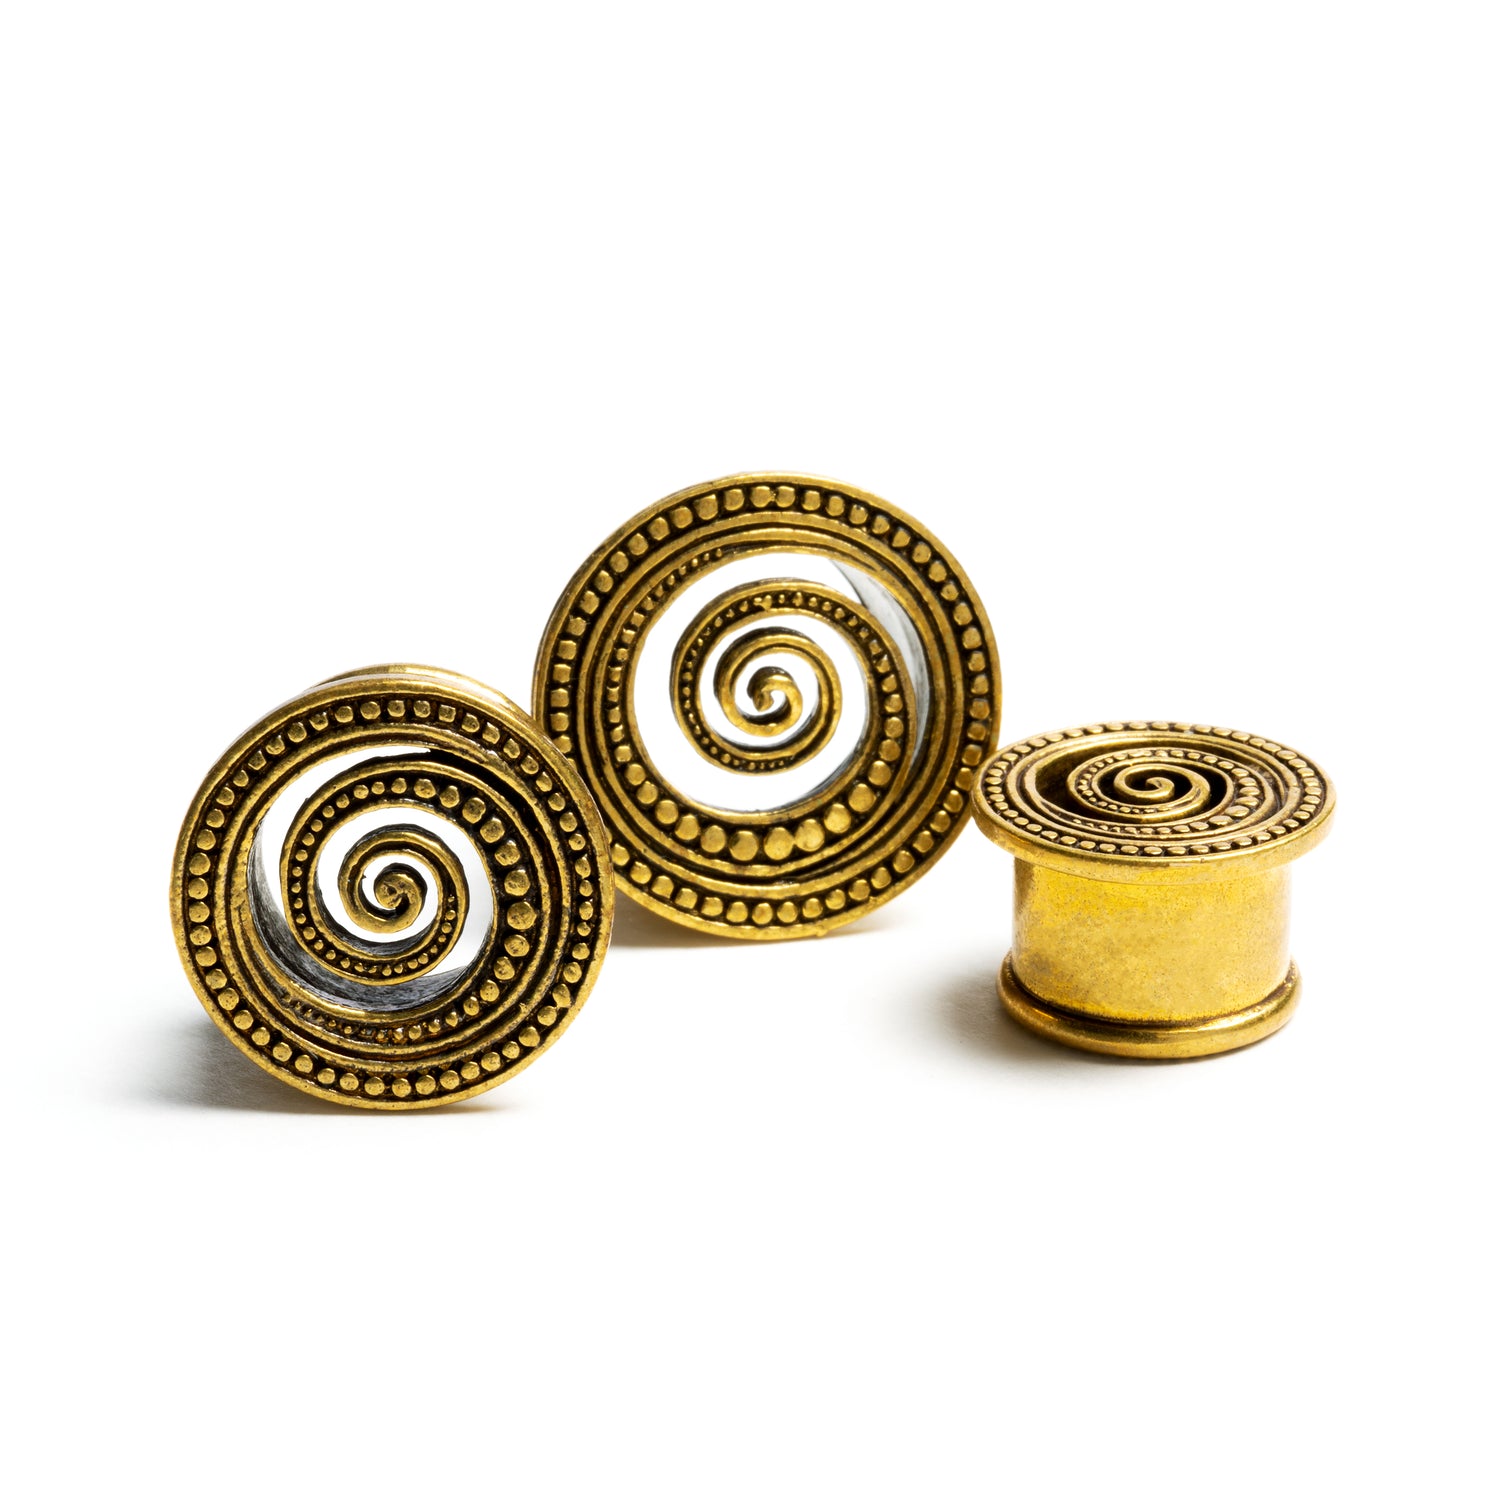 Golden spiral plug tunnels front and side view